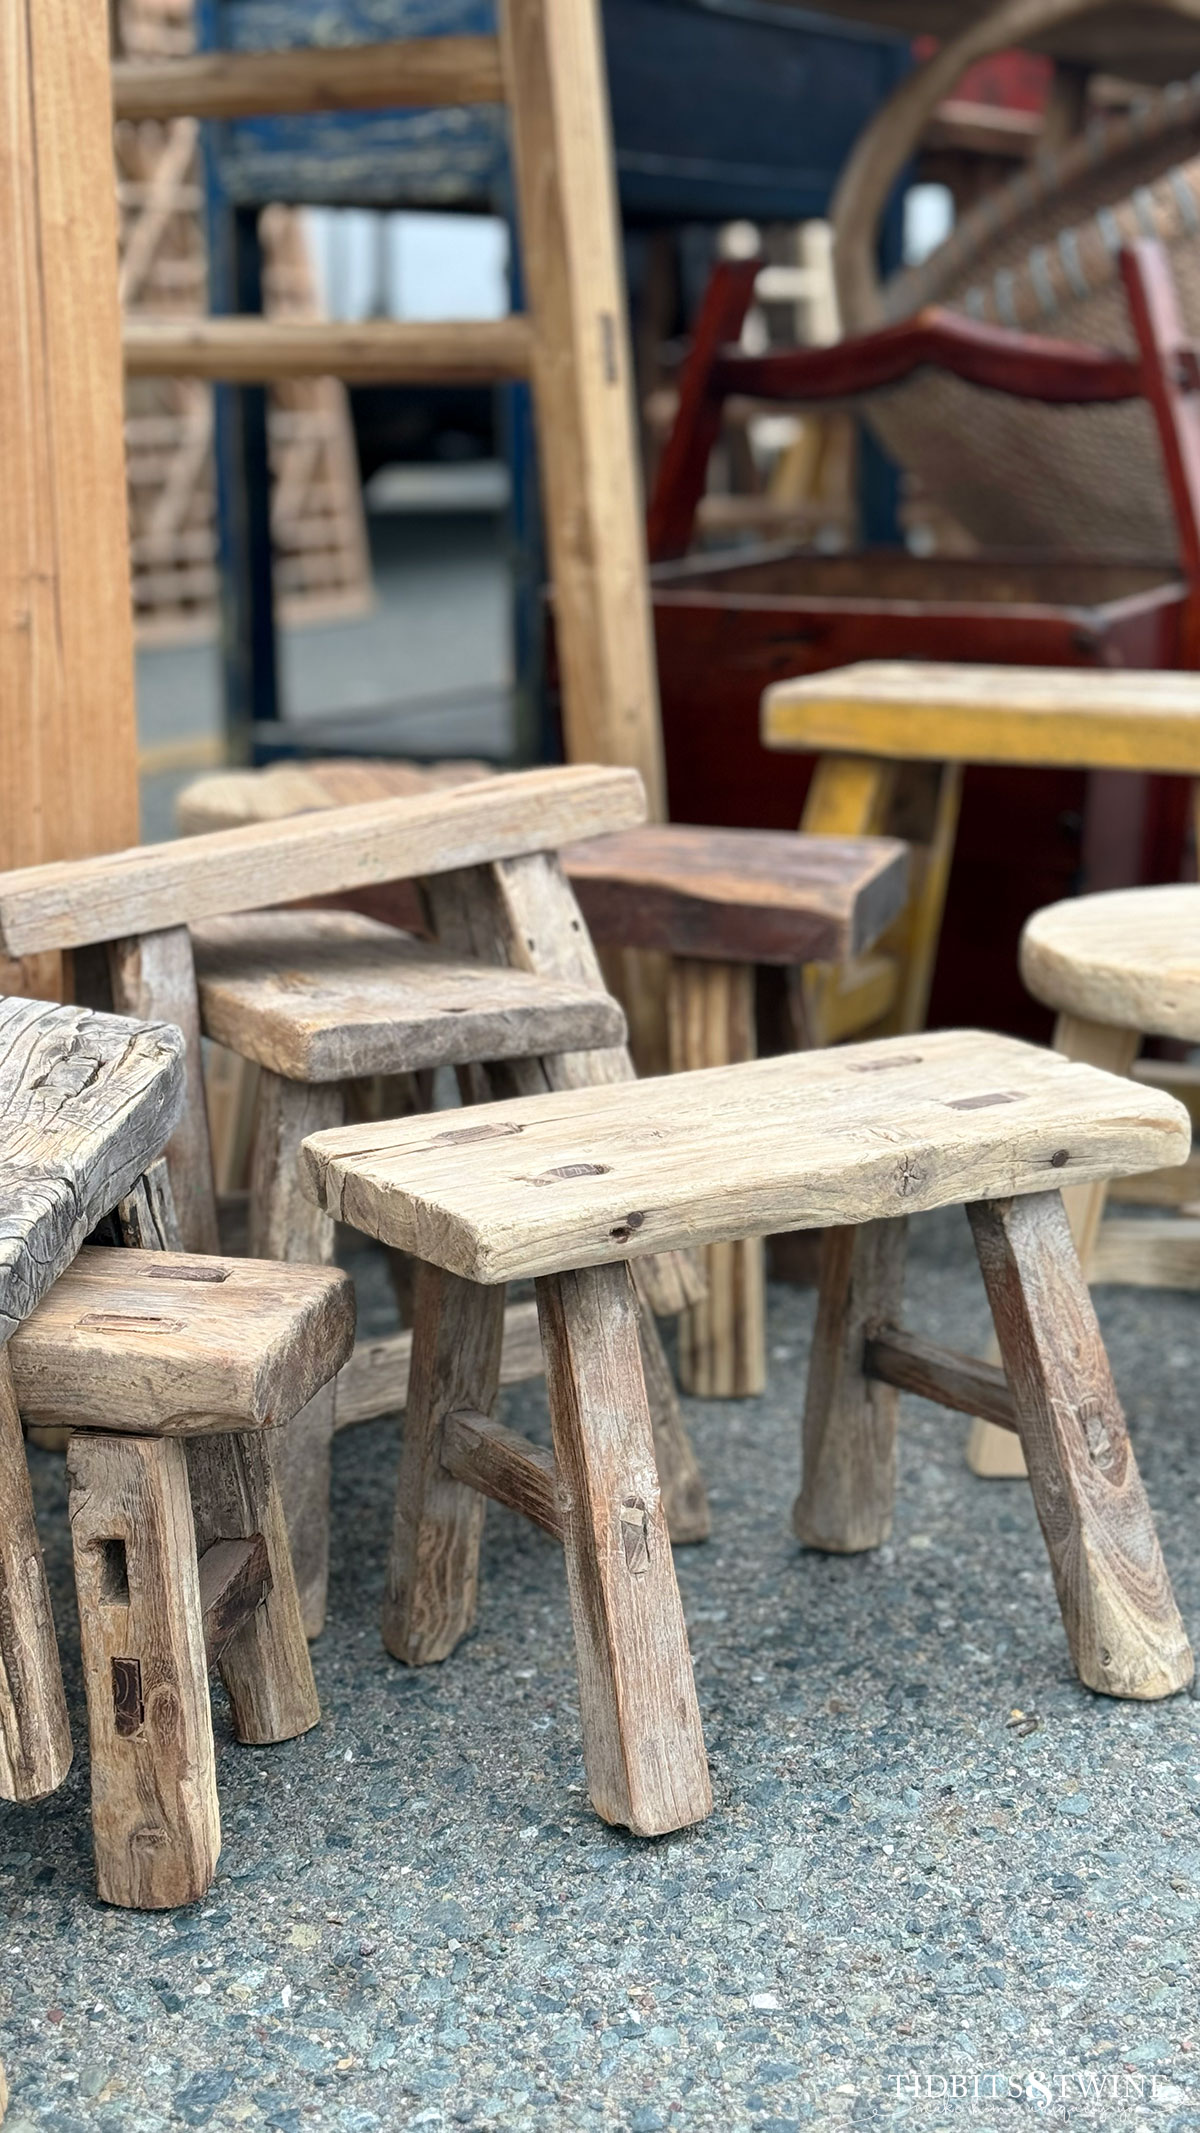 Small antique wooden stools risers displayed on the ground at an antique fair